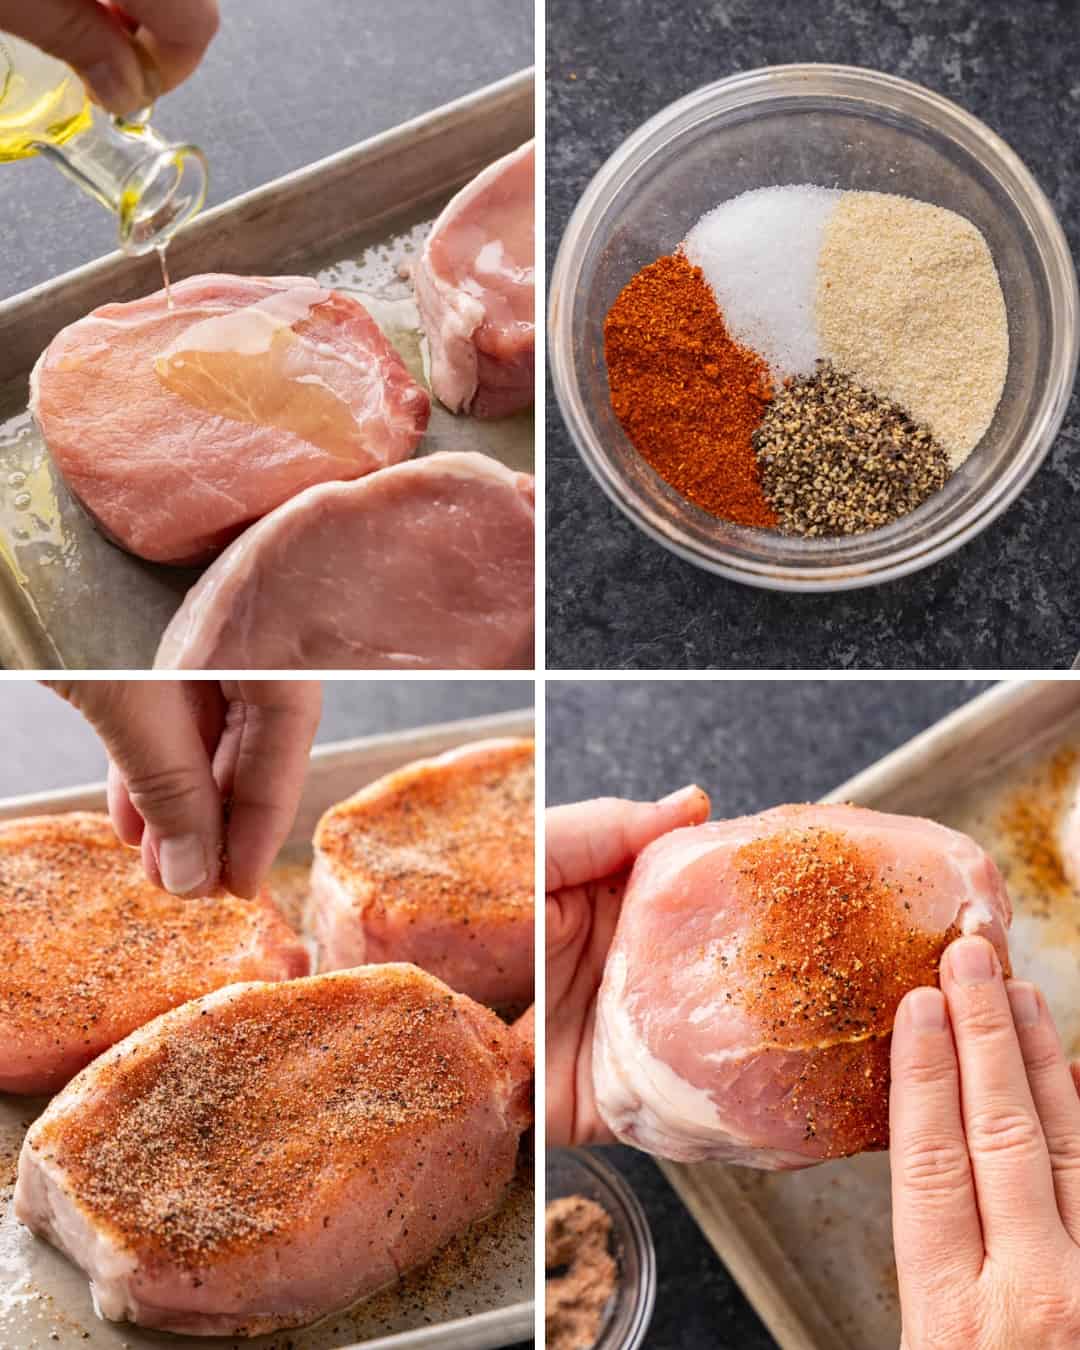 A collage of process shots showing how to make baked pork chops from start to finish.